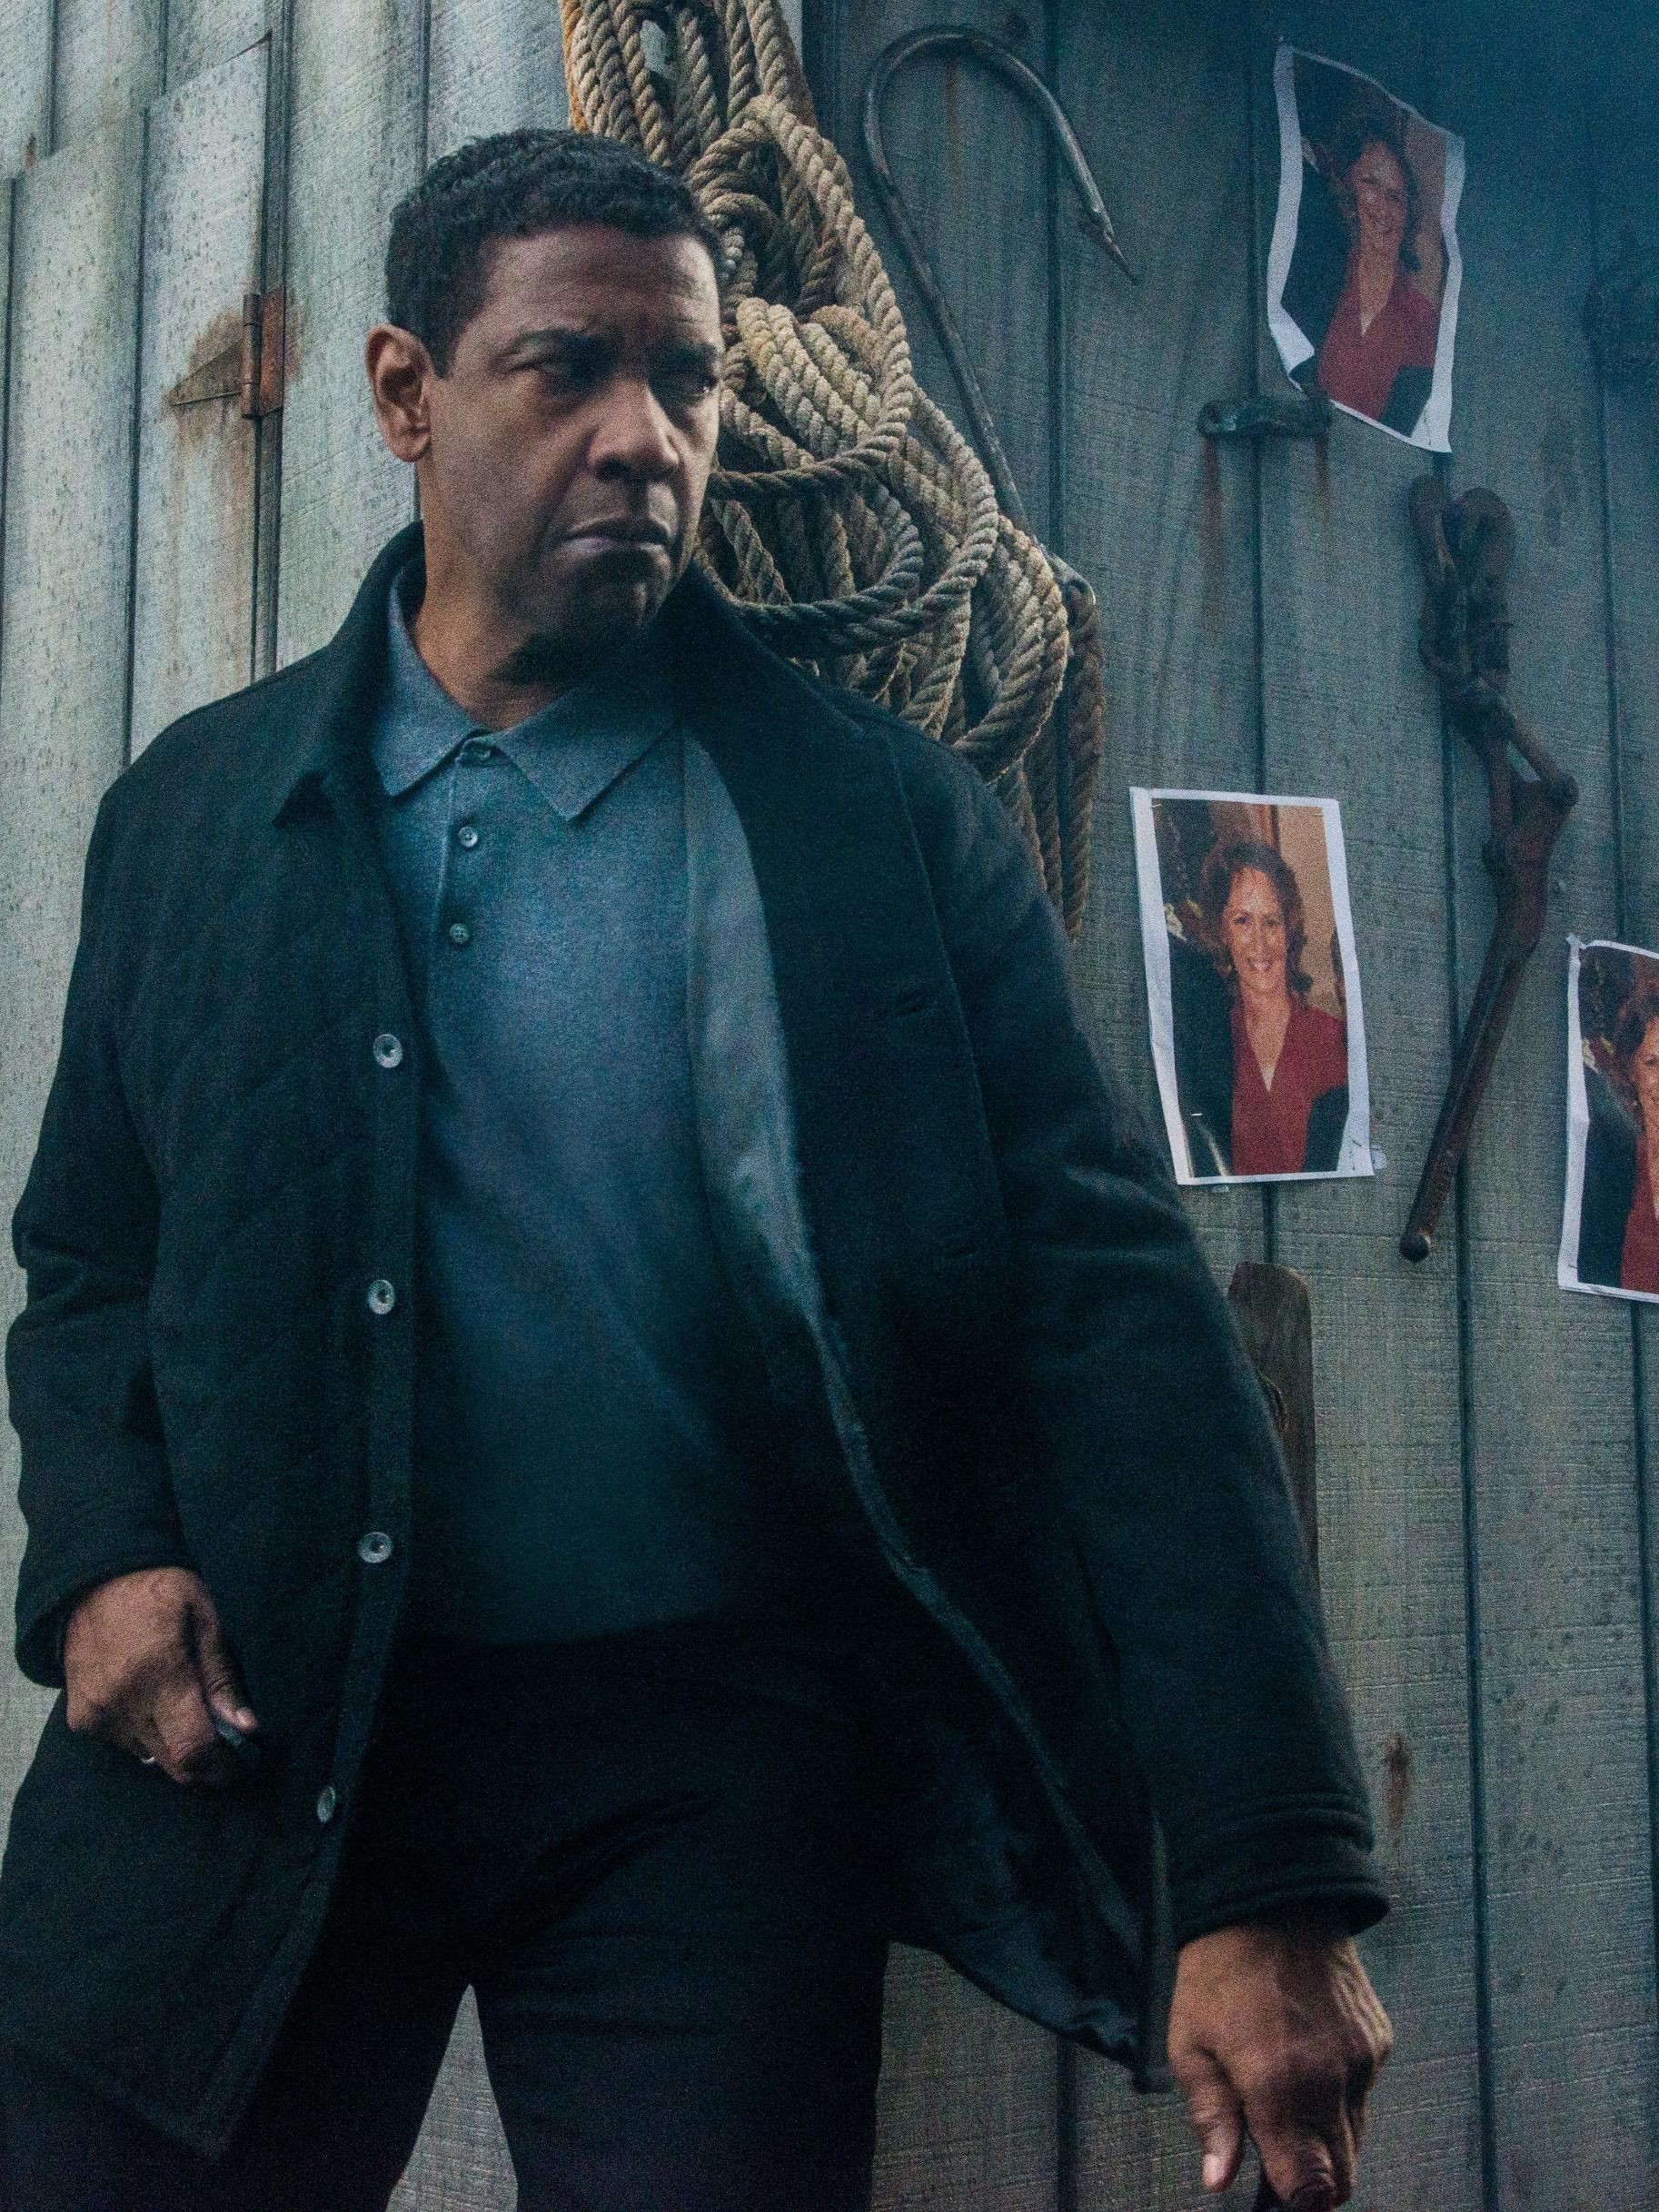 The Equalizer 2' review: Denzel Washington hits familiar targets in bloody sequel CNN